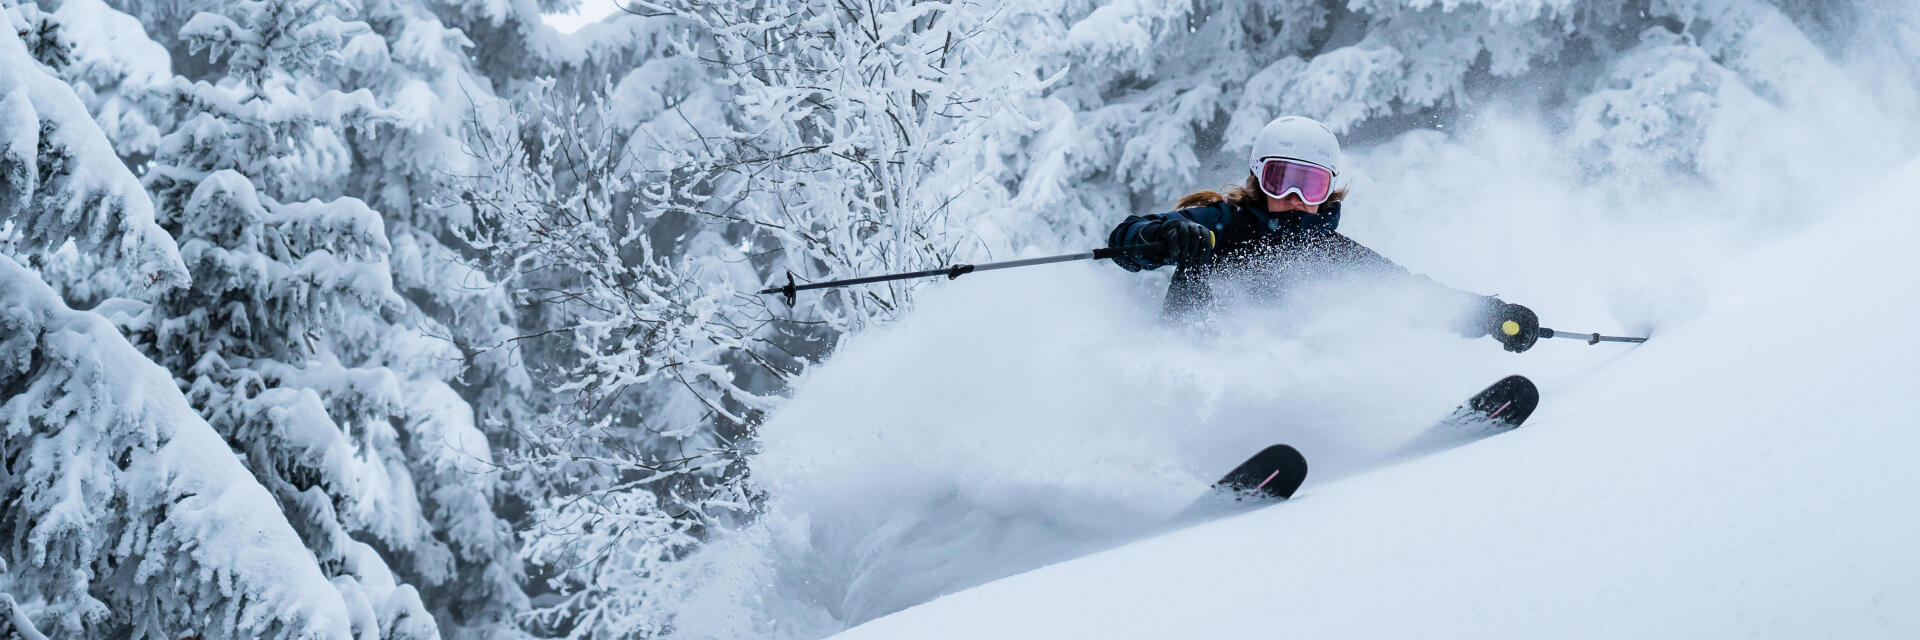 How to choose your freeride skis?